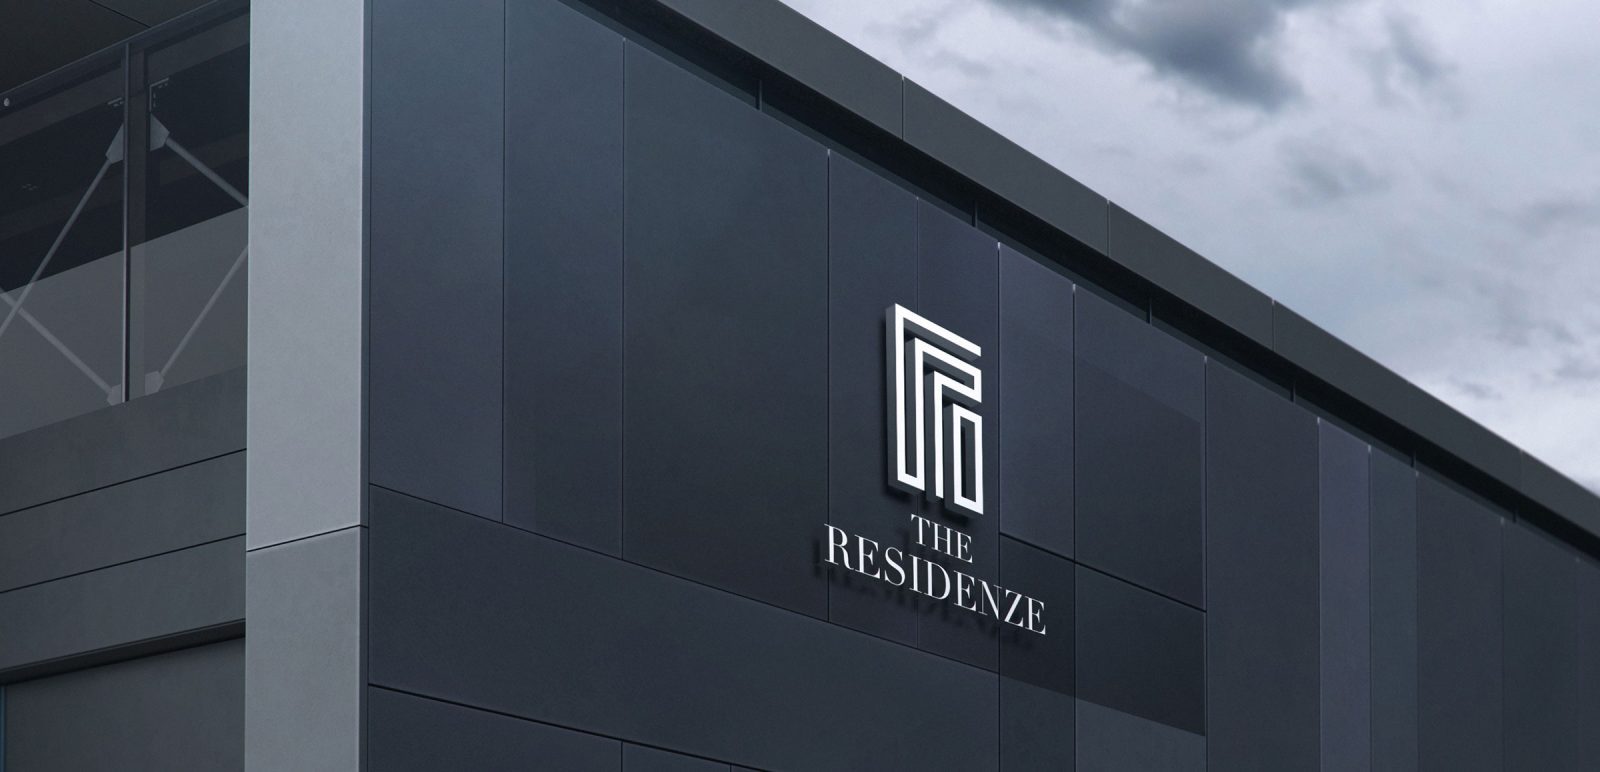 The Residenze